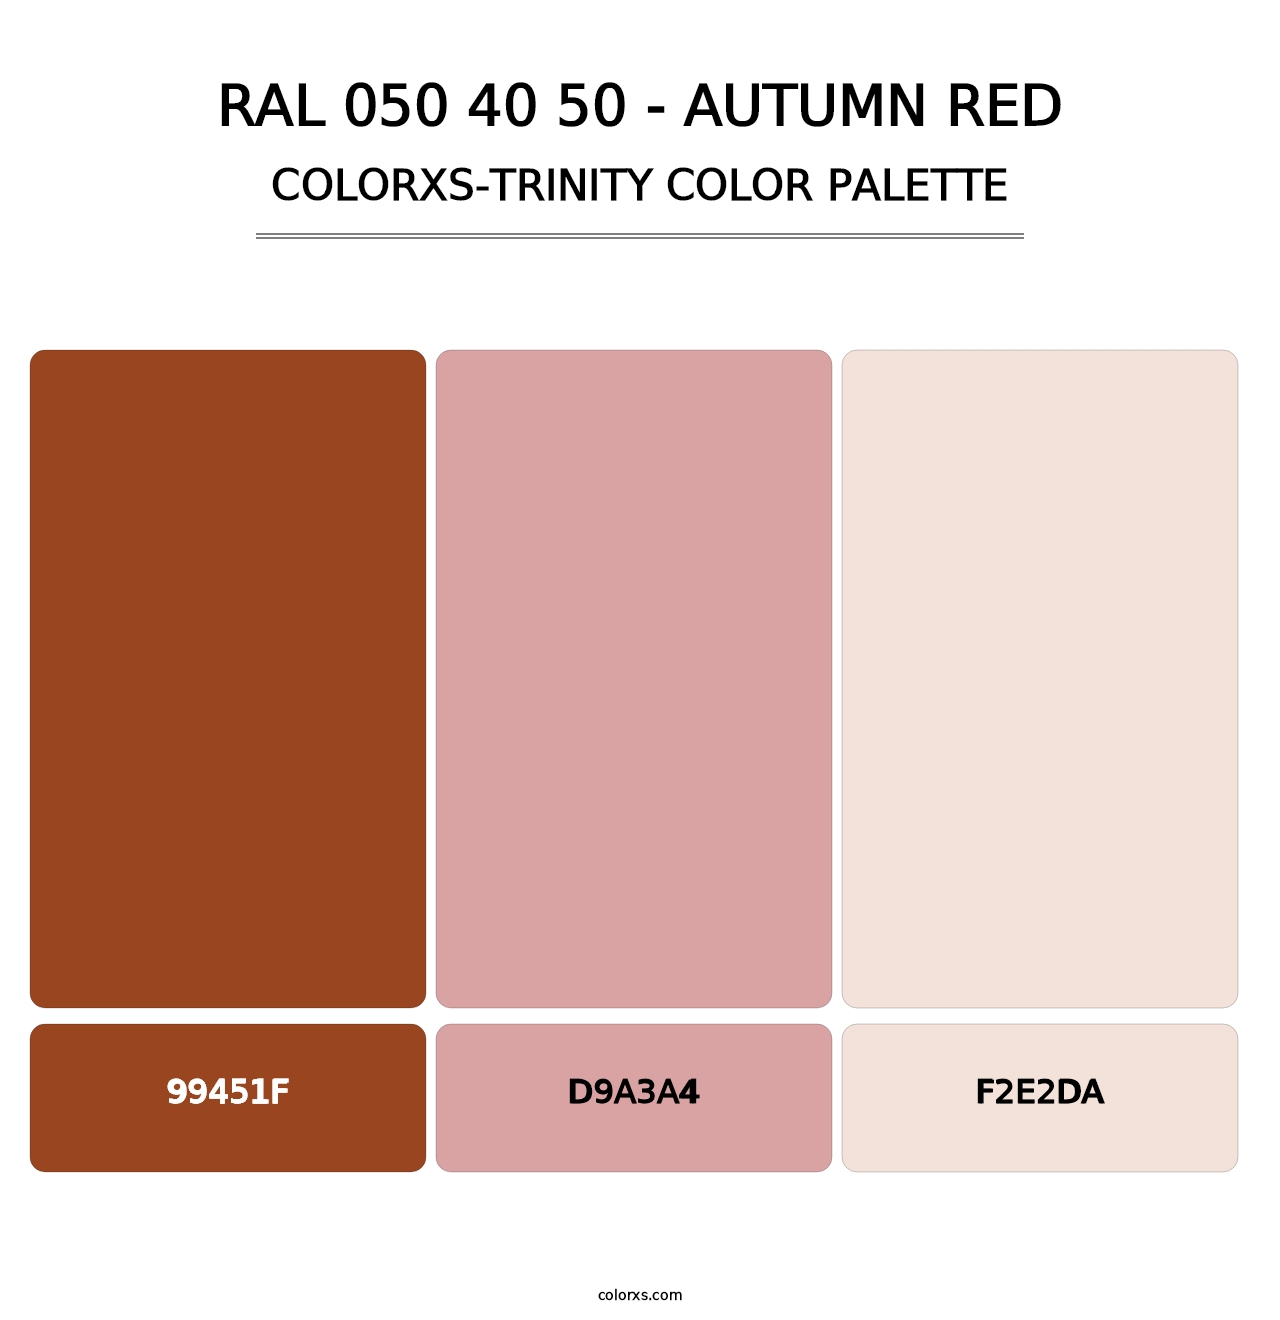 RAL 050 40 50 - Autumn Red - Colorxs Trinity Palette